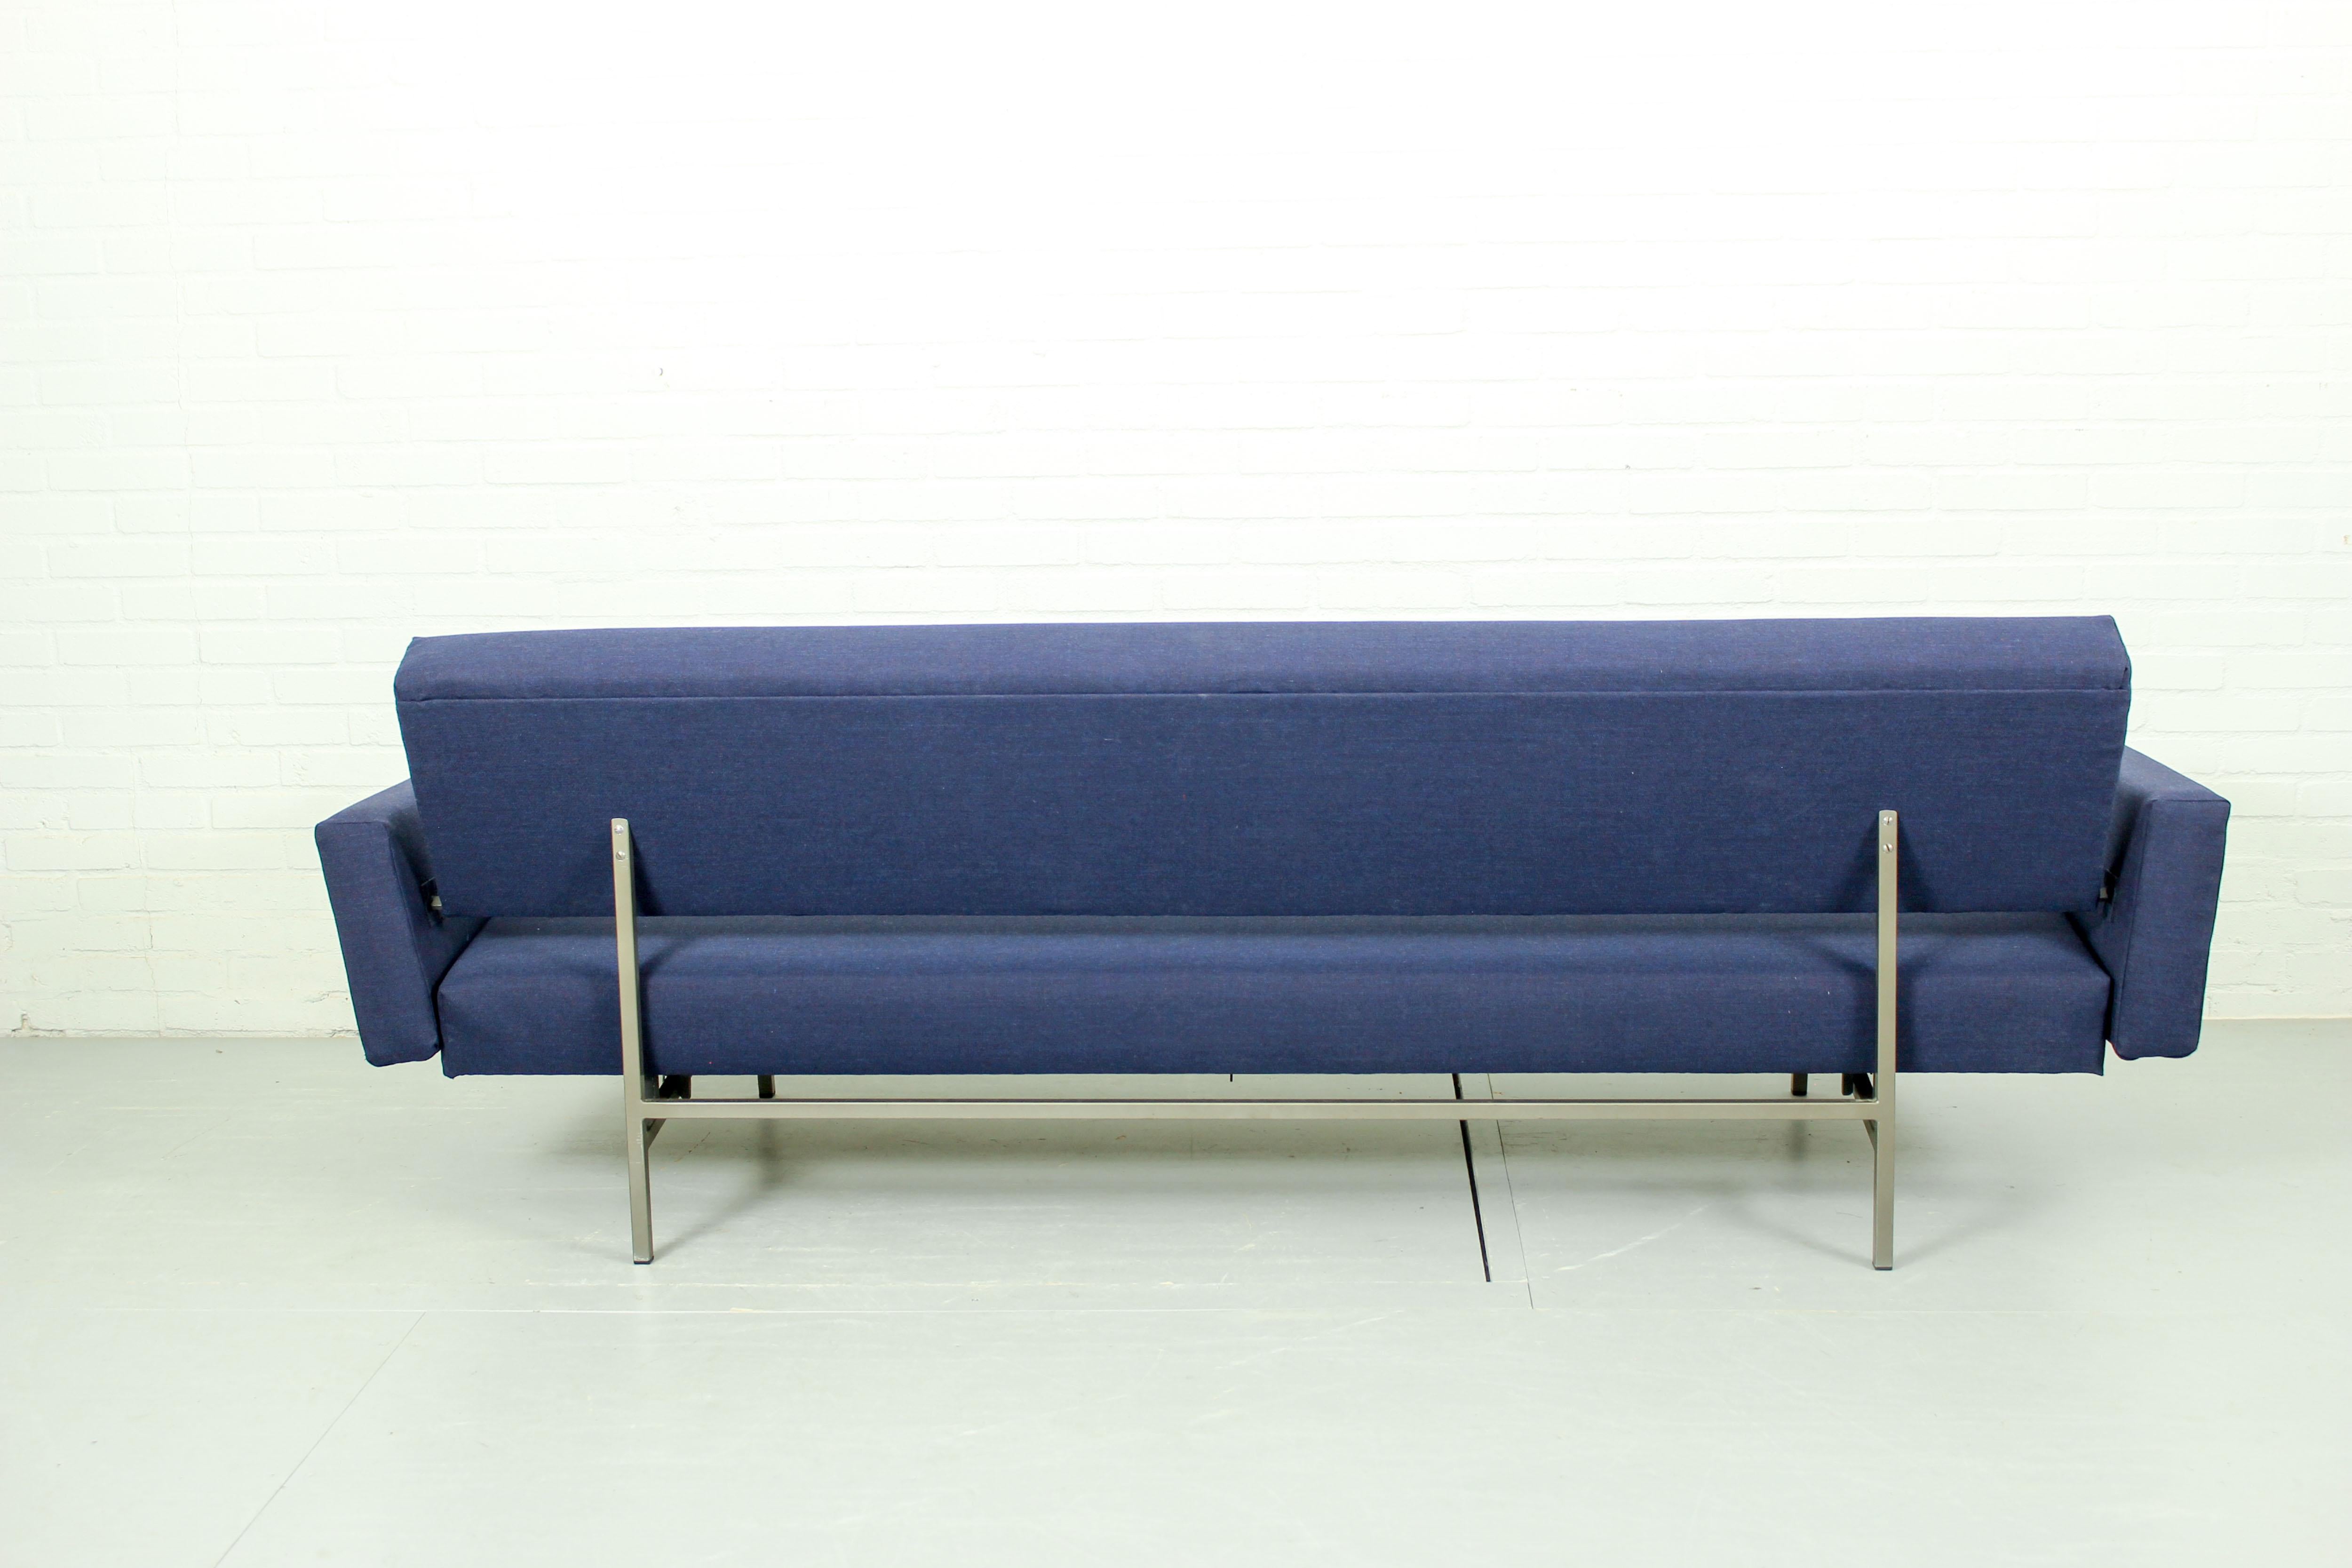 Sofa/ Daybed by Rob Parry for Gelderland, Netherlands, 1950s For Sale 1